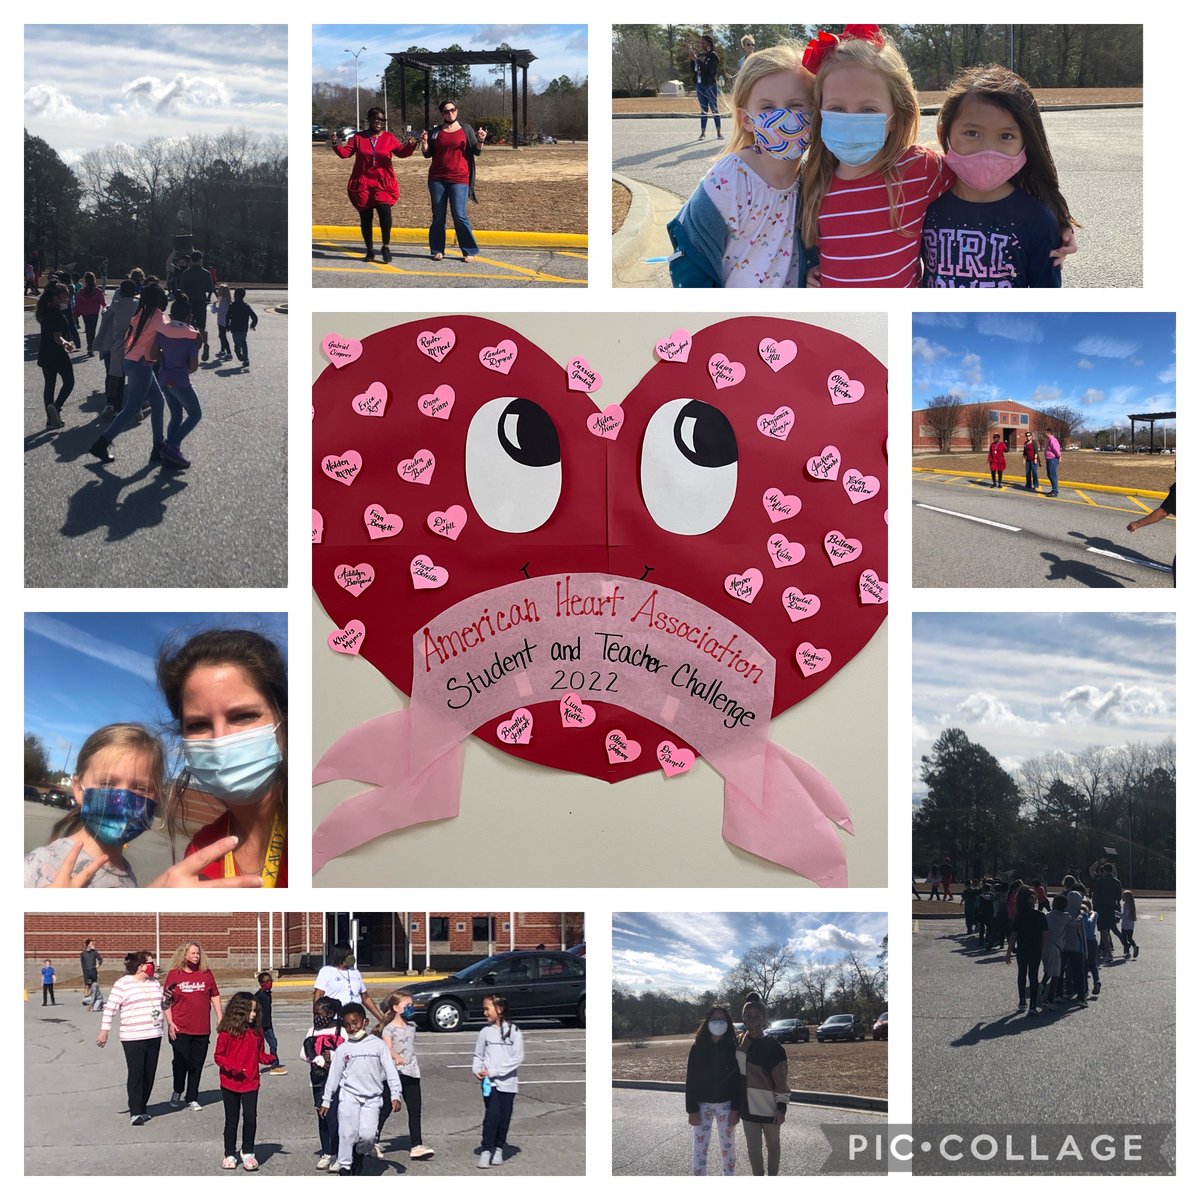 Our Beacons celebrated raising money for the American Heart Association by holding a Heart Walk today!  Our school raised $3,070.50!  Continue to light the way in community service, BRE!  #sunshineandsmiles #hearthealthawareness @RichlandTwo @AmericanHeartSC @kjameshill